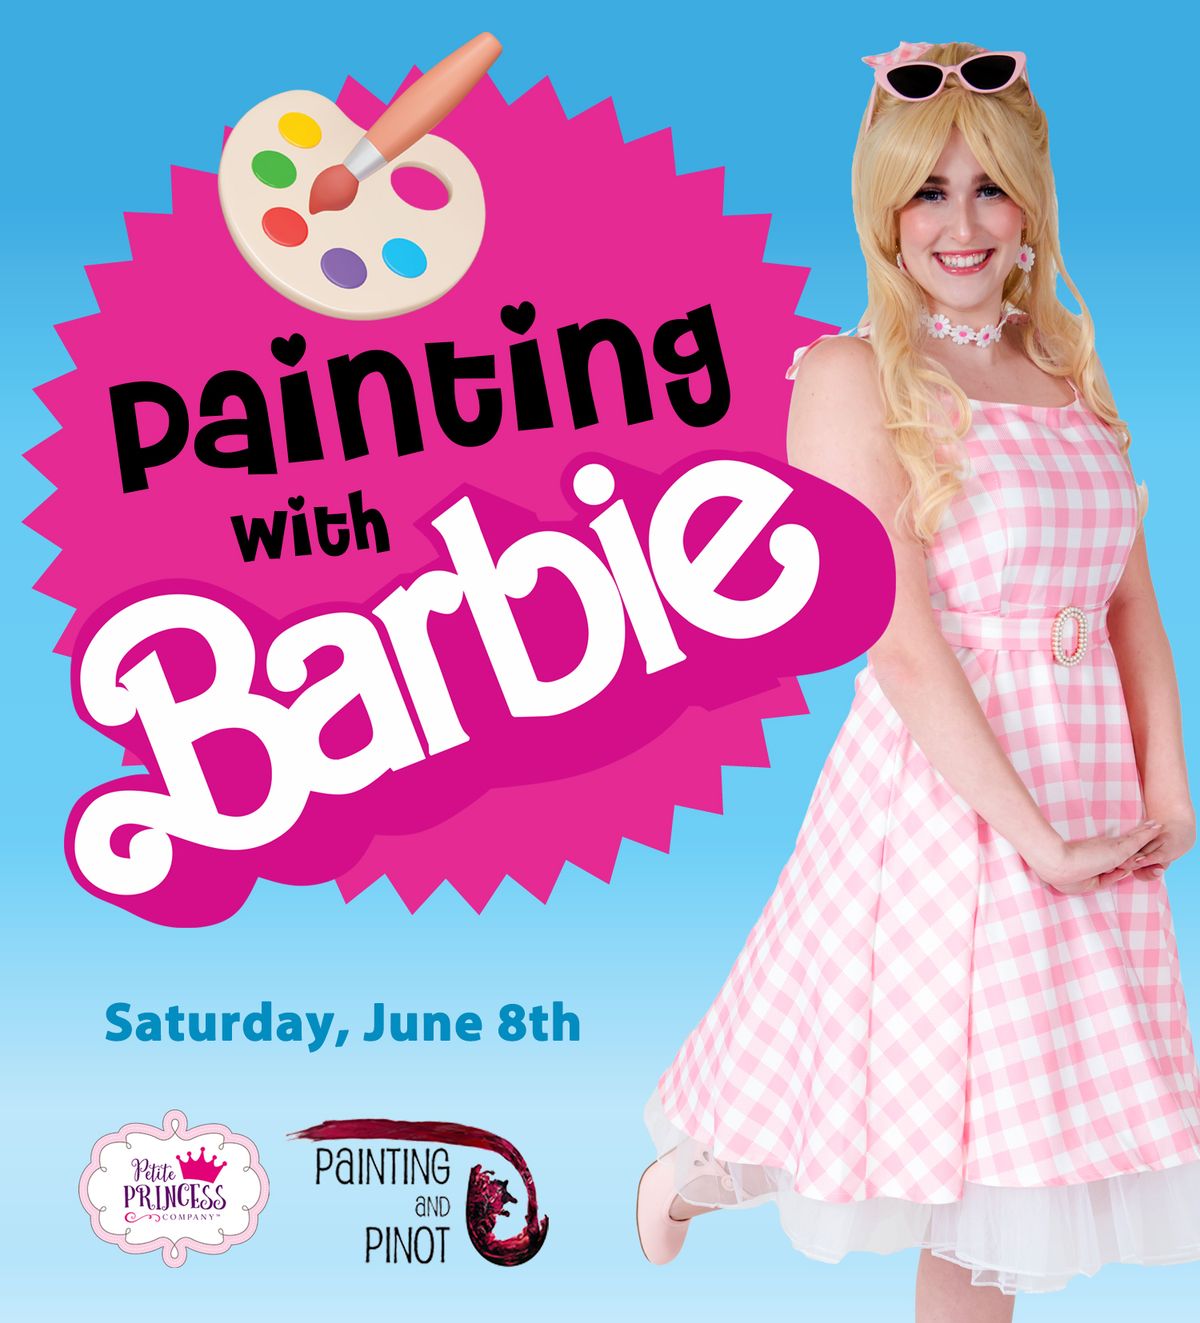 Paint with Barbie